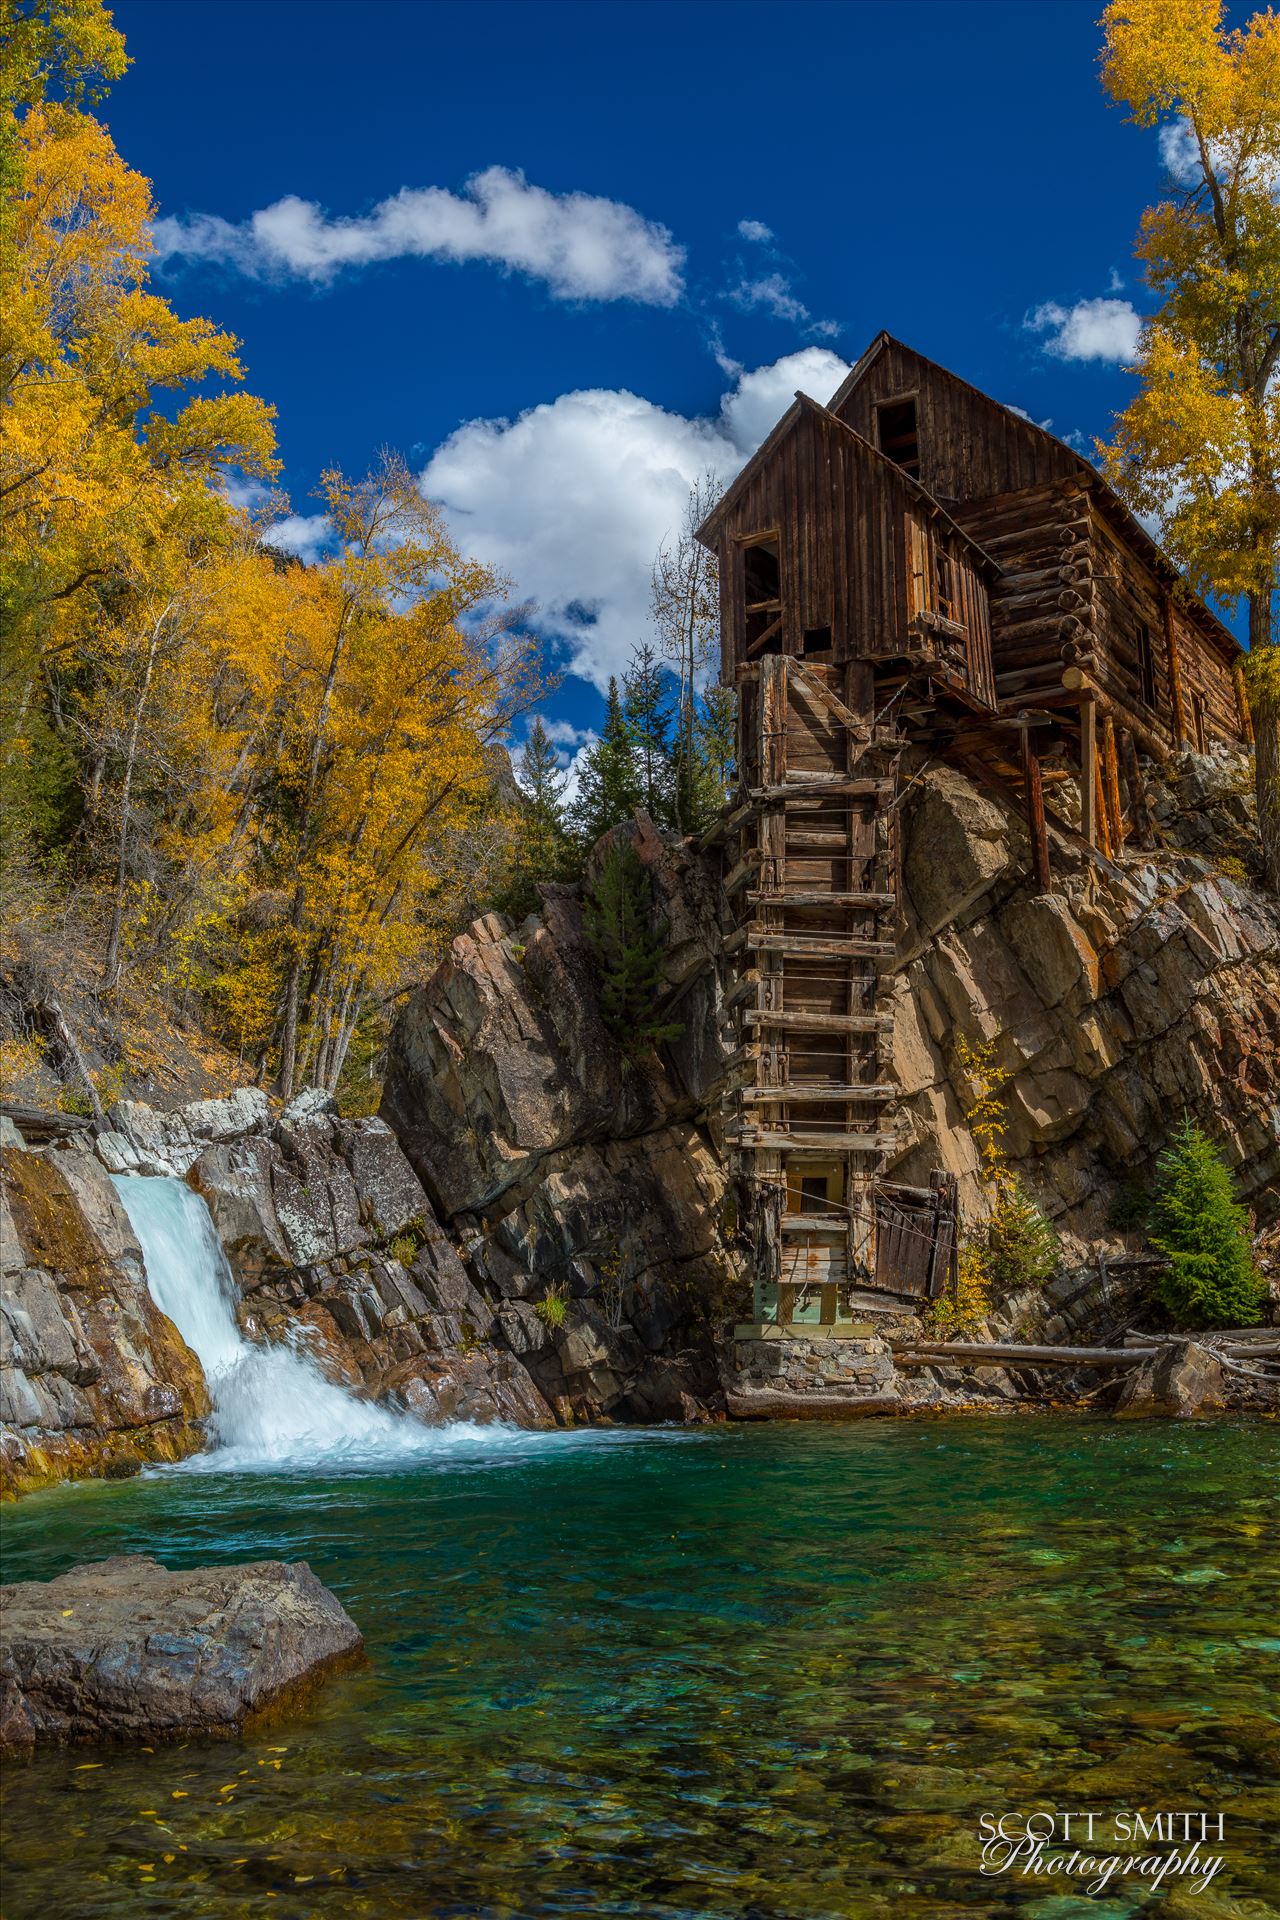 Crystal MIll No 3 - The Crystal Mill, or the Old Mill is an 1892 wooden powerhouse located on an outcrop above the Crystal River in Crystal, Colorado by Scott Smith Photos